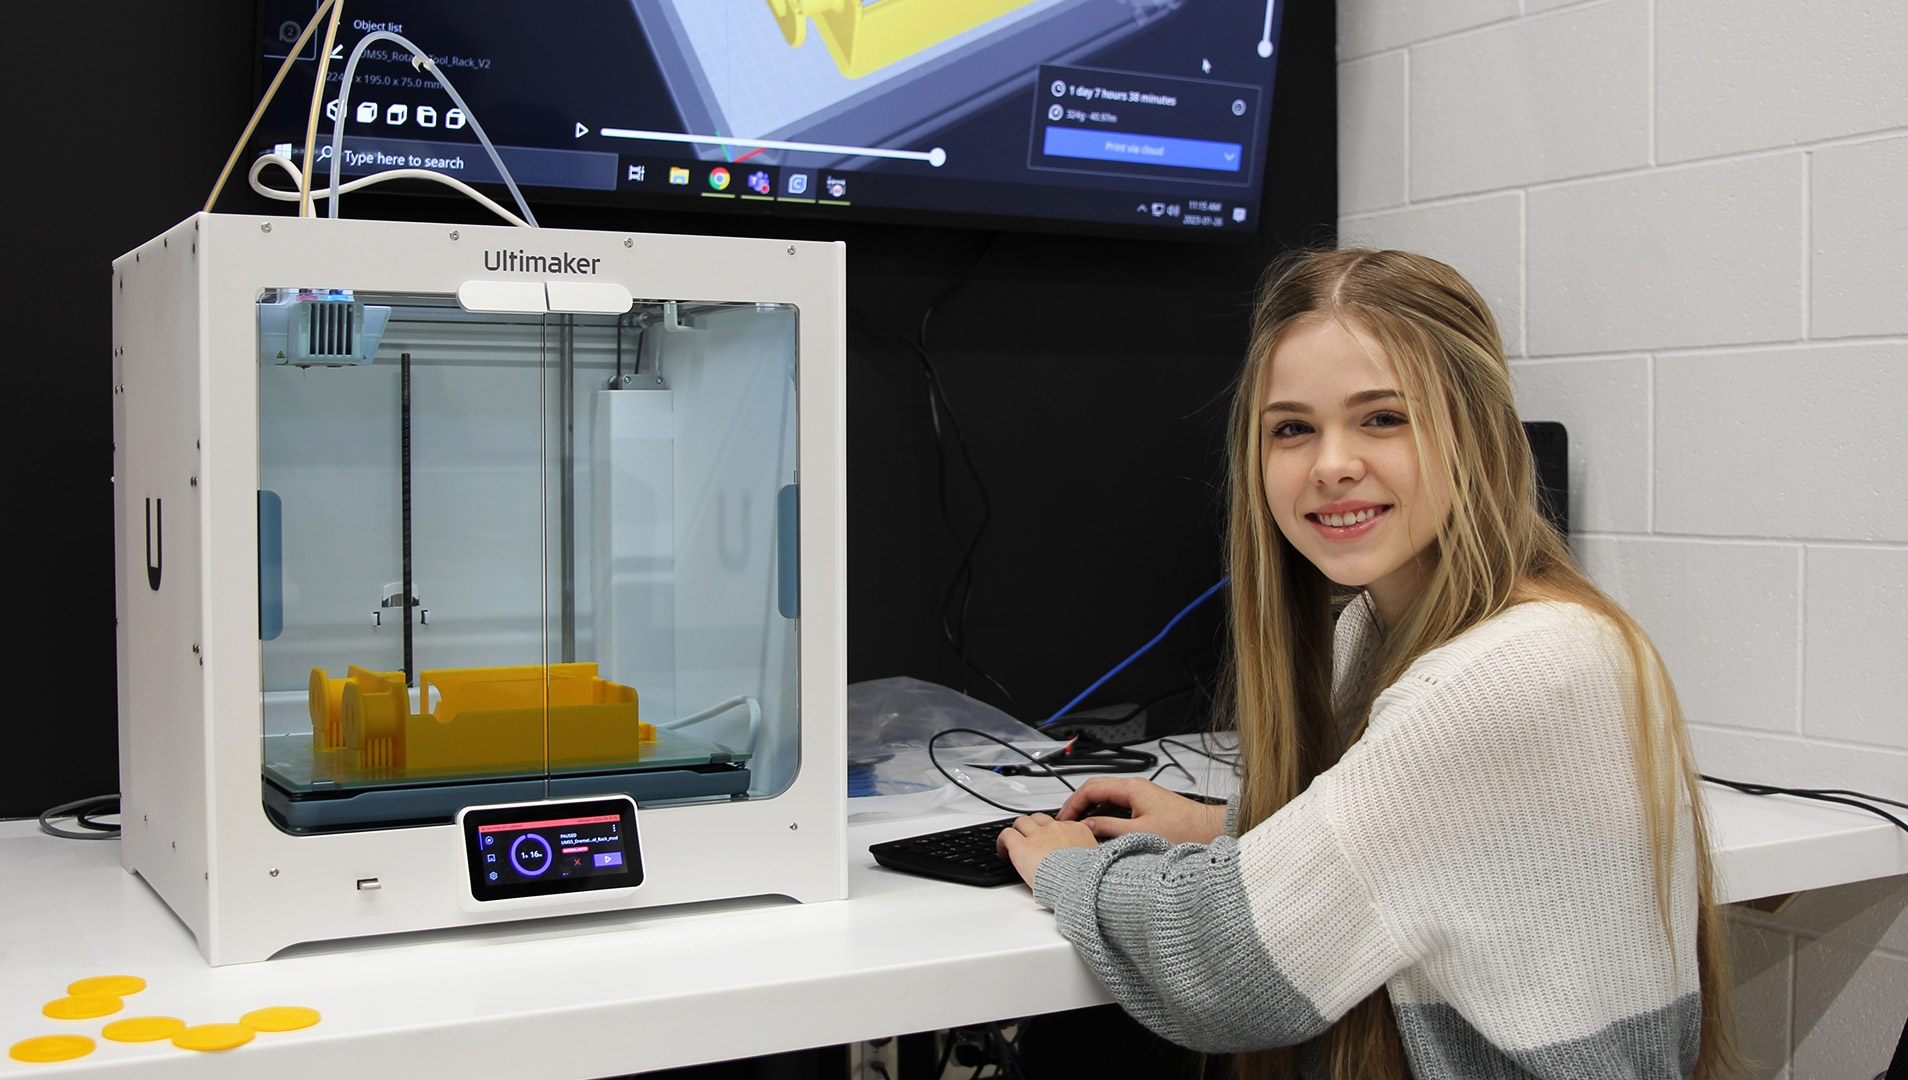 A female student sitting in front of a 3D printer with a big display above it, inputting printing instructions.